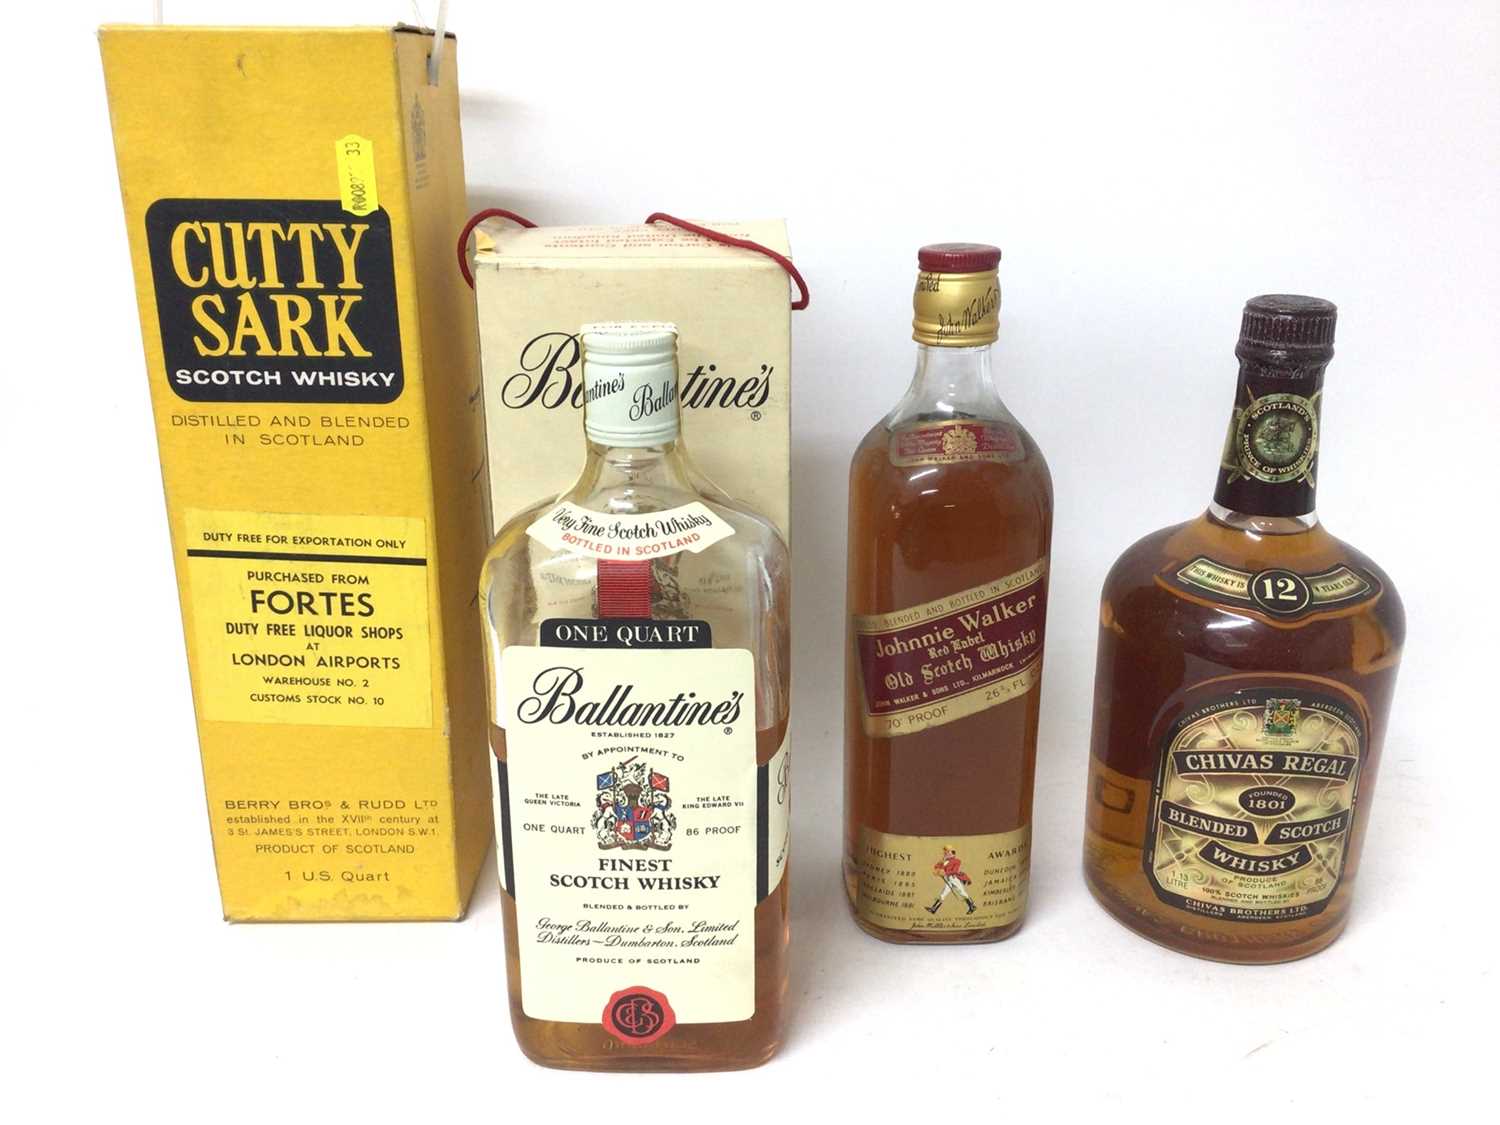 Lot 32 - Four mixed bottles of Scotch Whisky, including Ballantine's, Cutty Sark, Chivas Regal, and Johnnie Walker Red Label